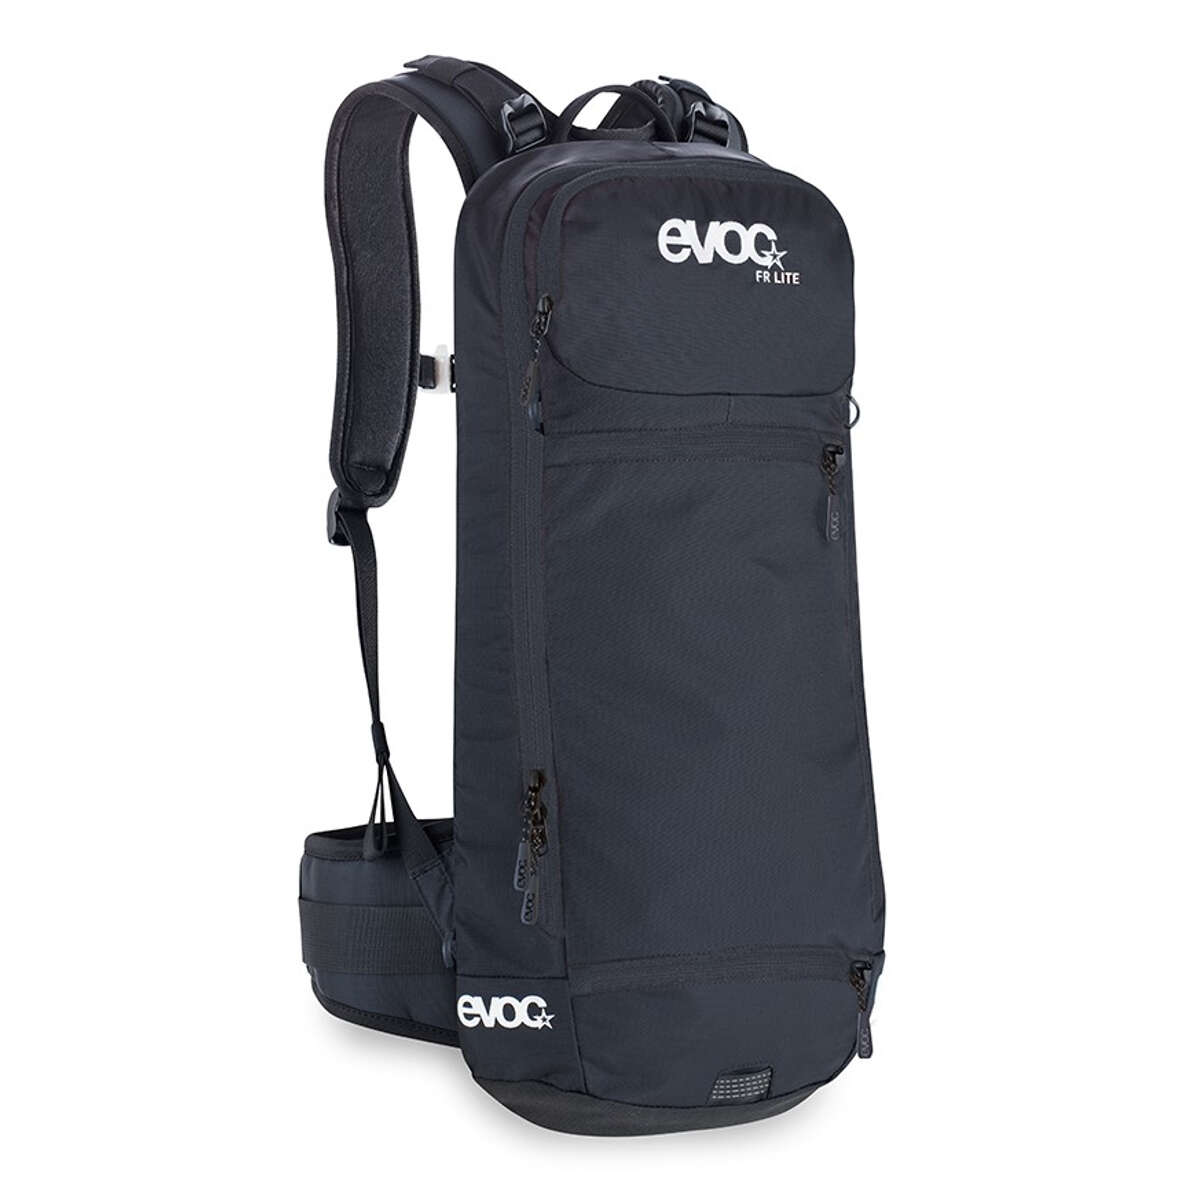 Evoc Protector Backpack with Hydration System Compartment FR Lite Black, 10 Liter